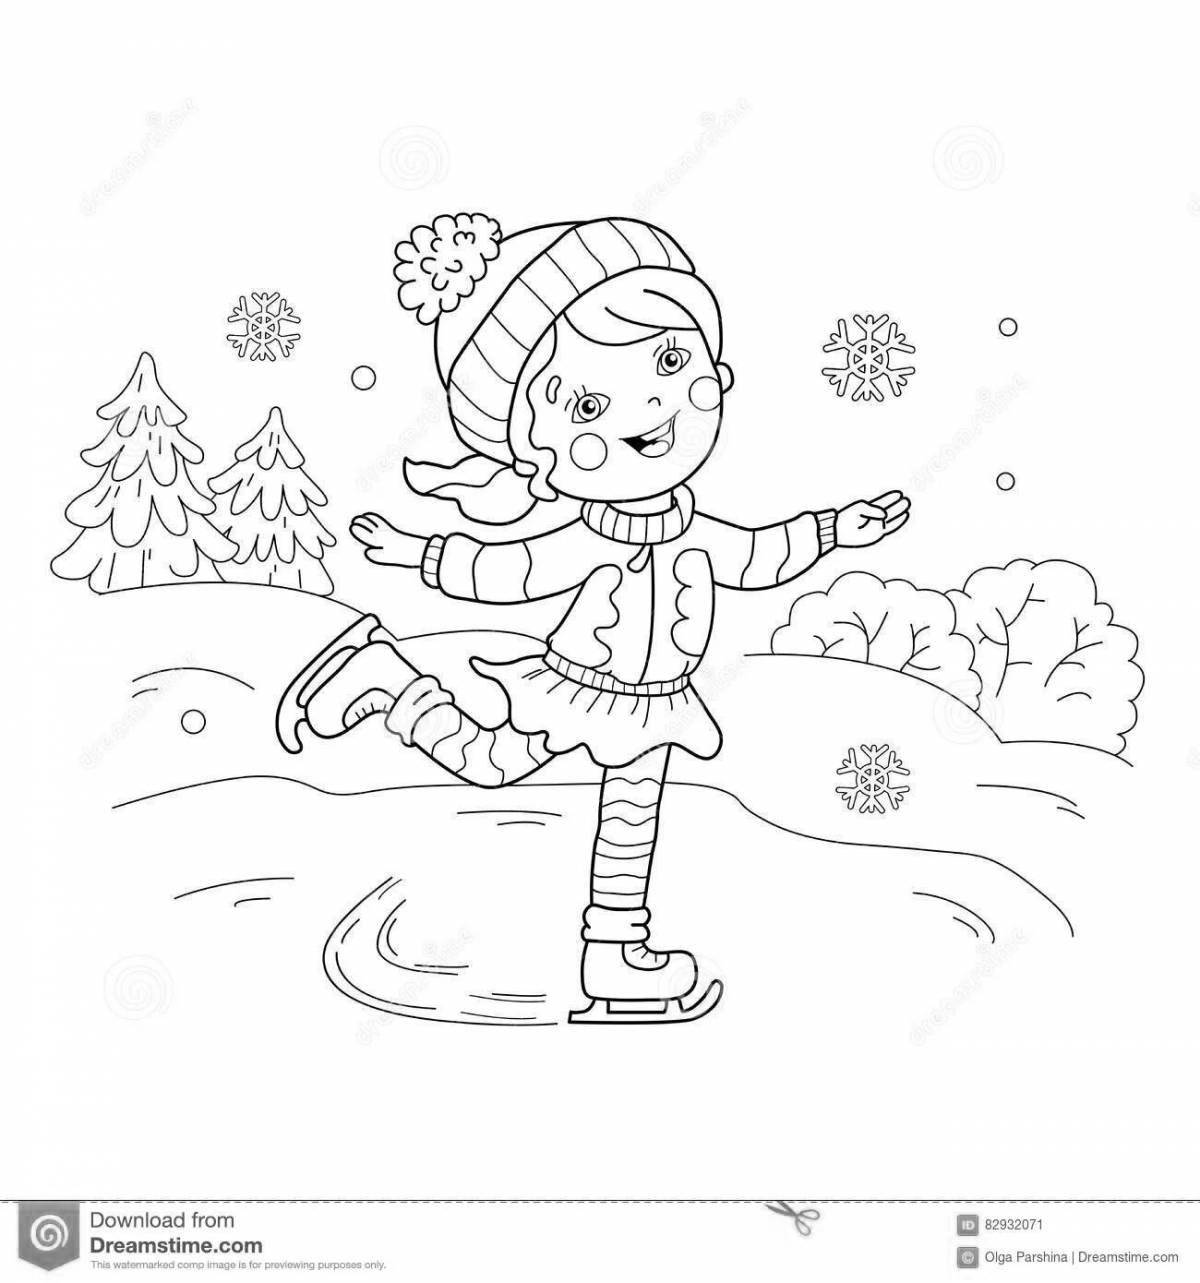 Exquisite ice rink coloring page